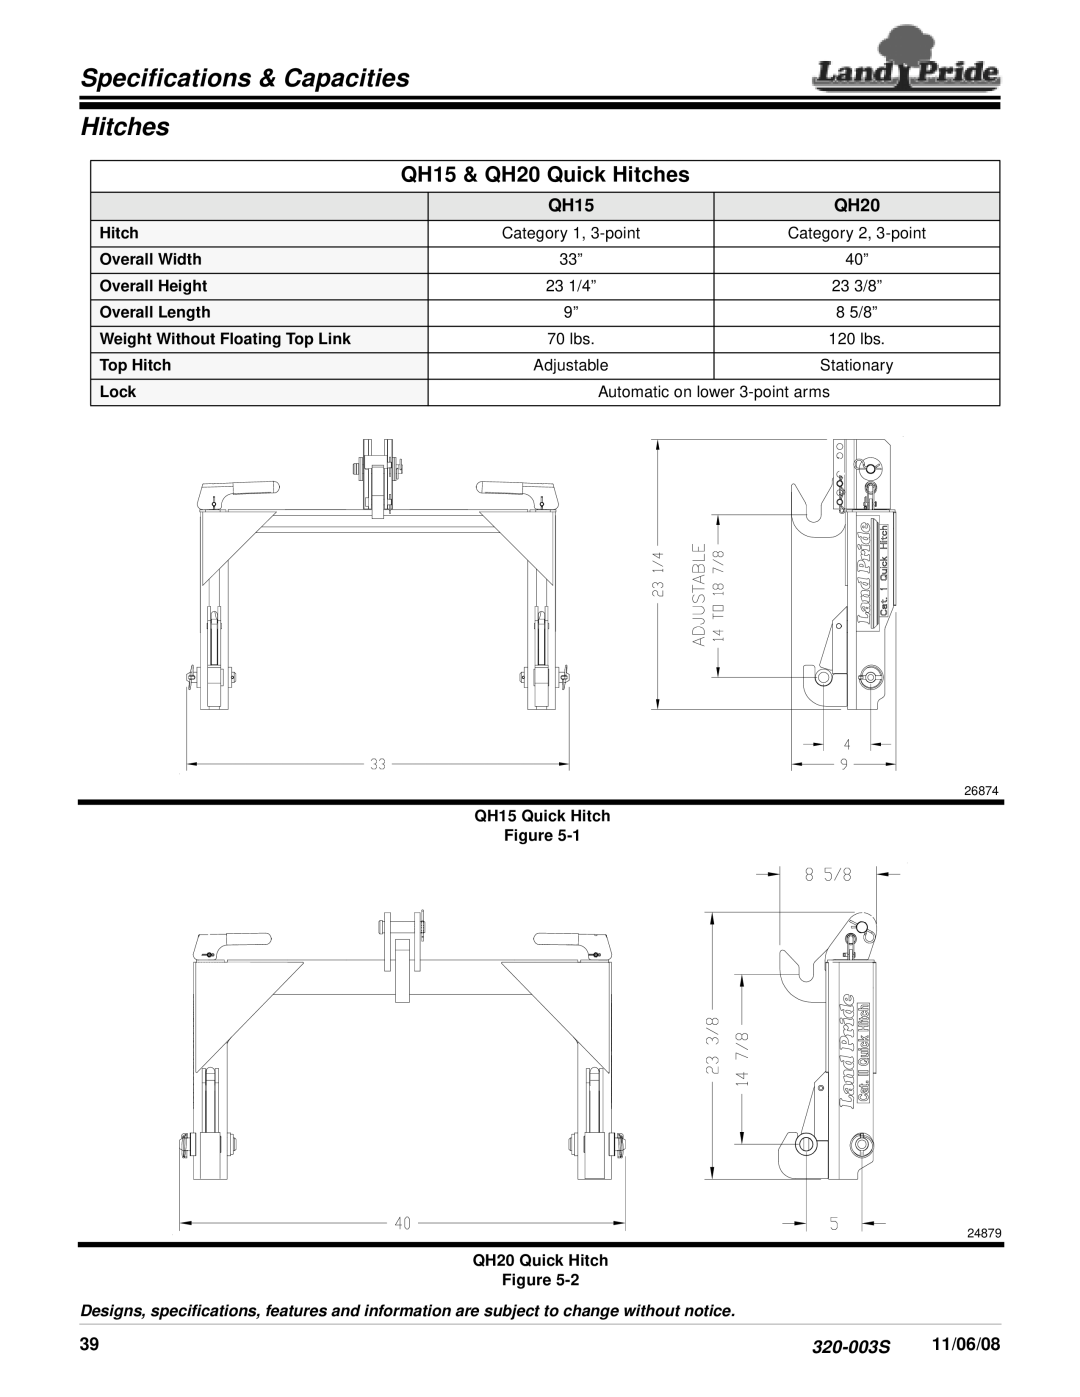 Land Pride specifications Specifications & Capacities Hitches, QH15 & QH20 Quick Hitches, 320-003S, 11/06/08, 23 1/4” 